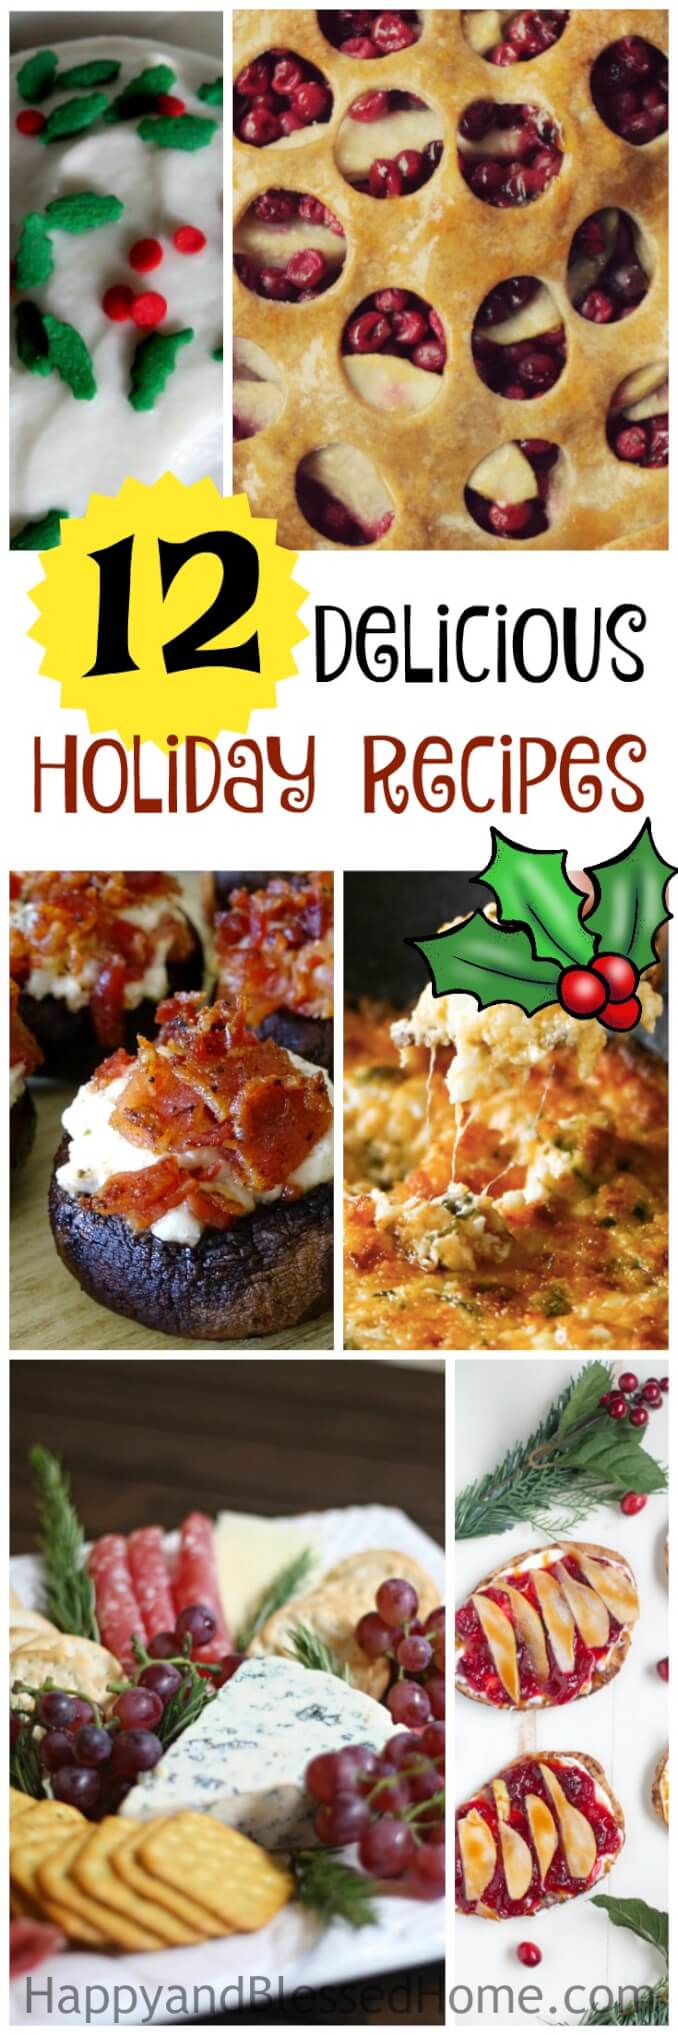 This list of 12 Delicious Christmas Recipes includes sweet treats, rich soup, hearty appetizers and tips for entertaining. There is no shortage of marvelous appetizer creations you can make with cranberries, bacon, and apples. Perfect for dinner, or at home party entertaining, this list will give you loads of ideas for what to serve for Christmas or any holiday!